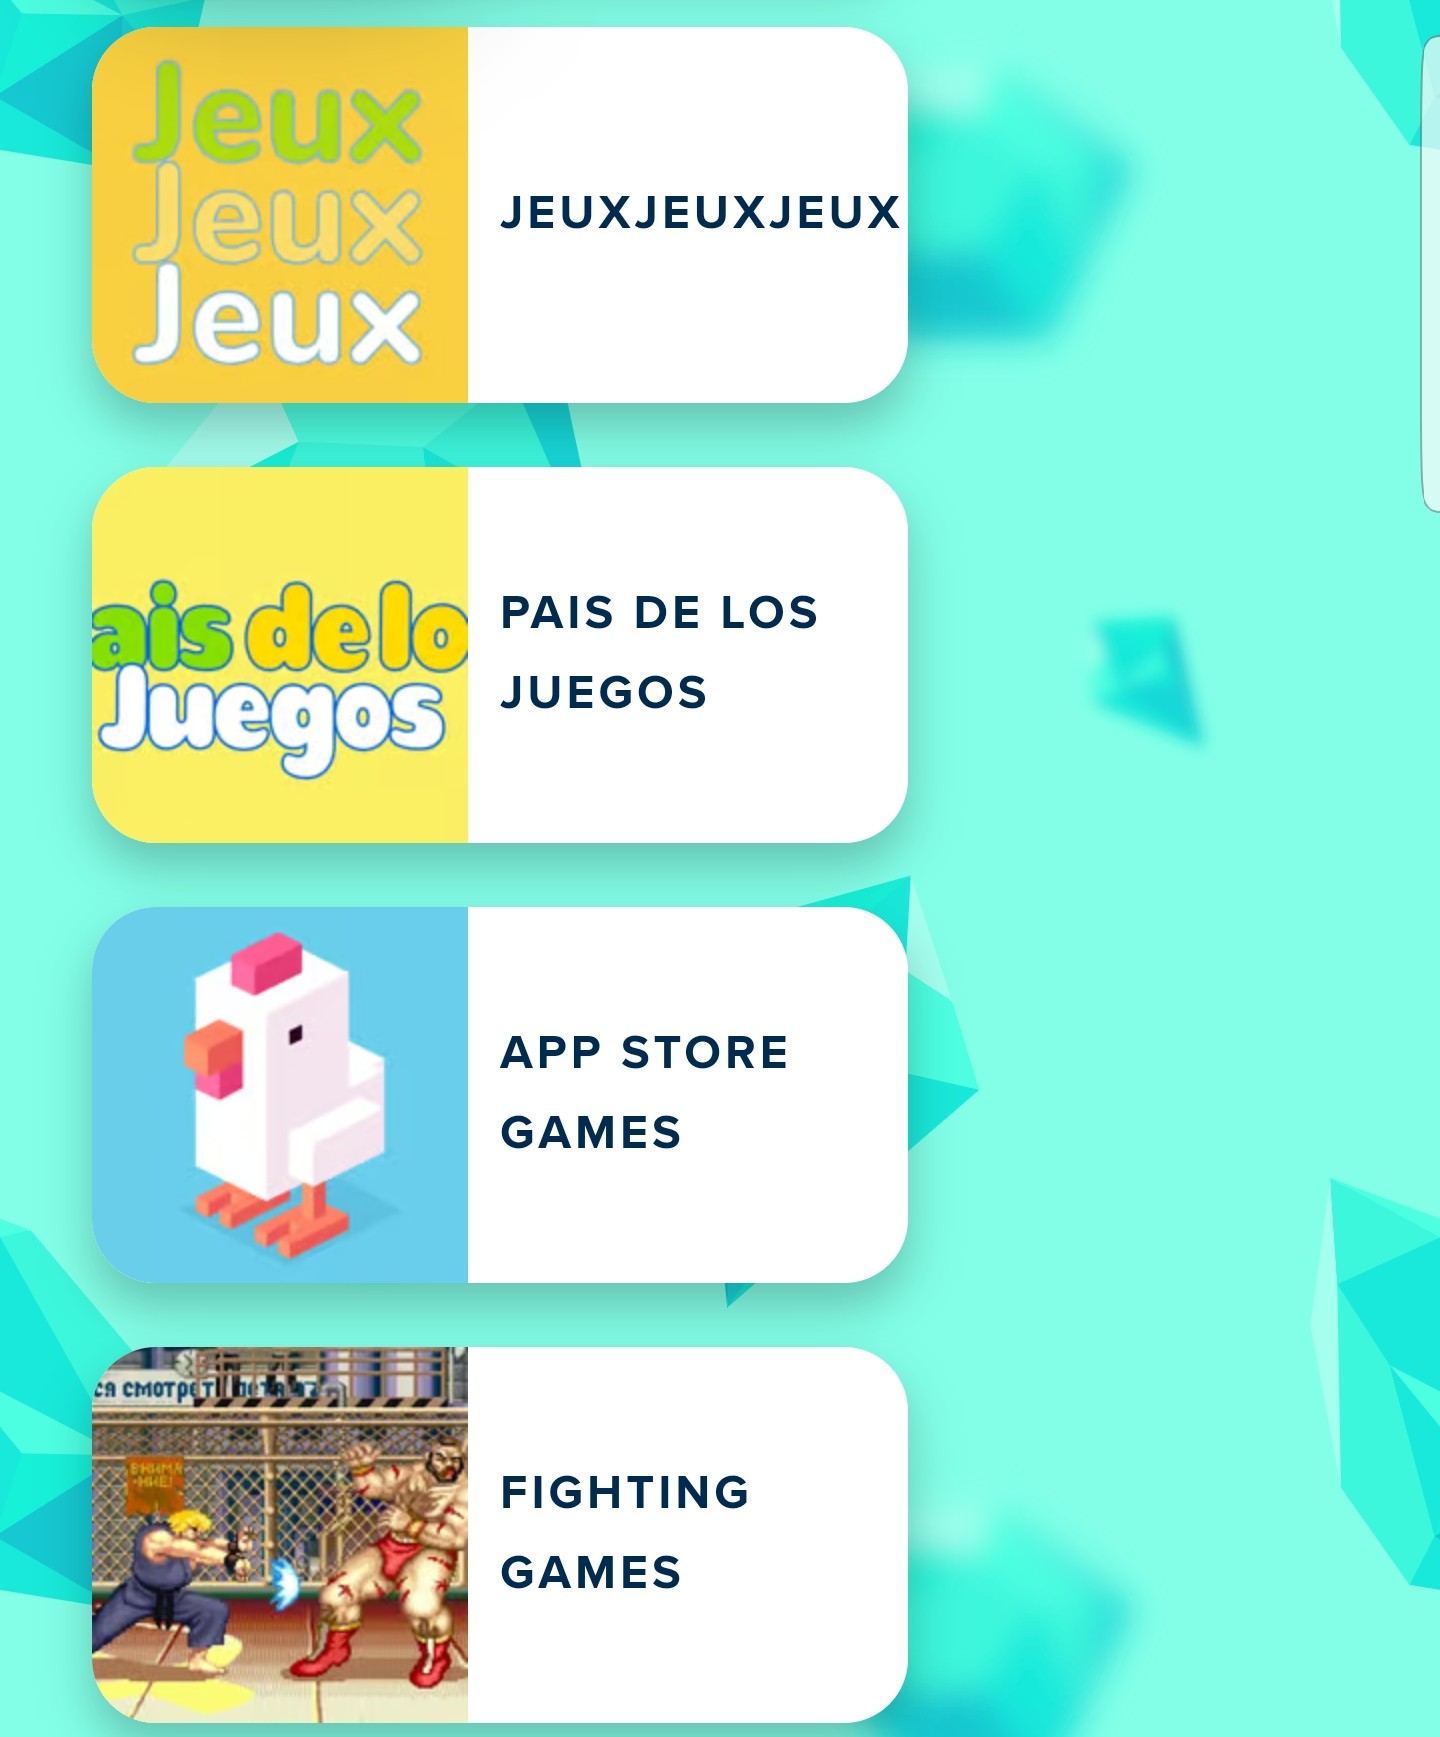 games poki::Appstore for Android